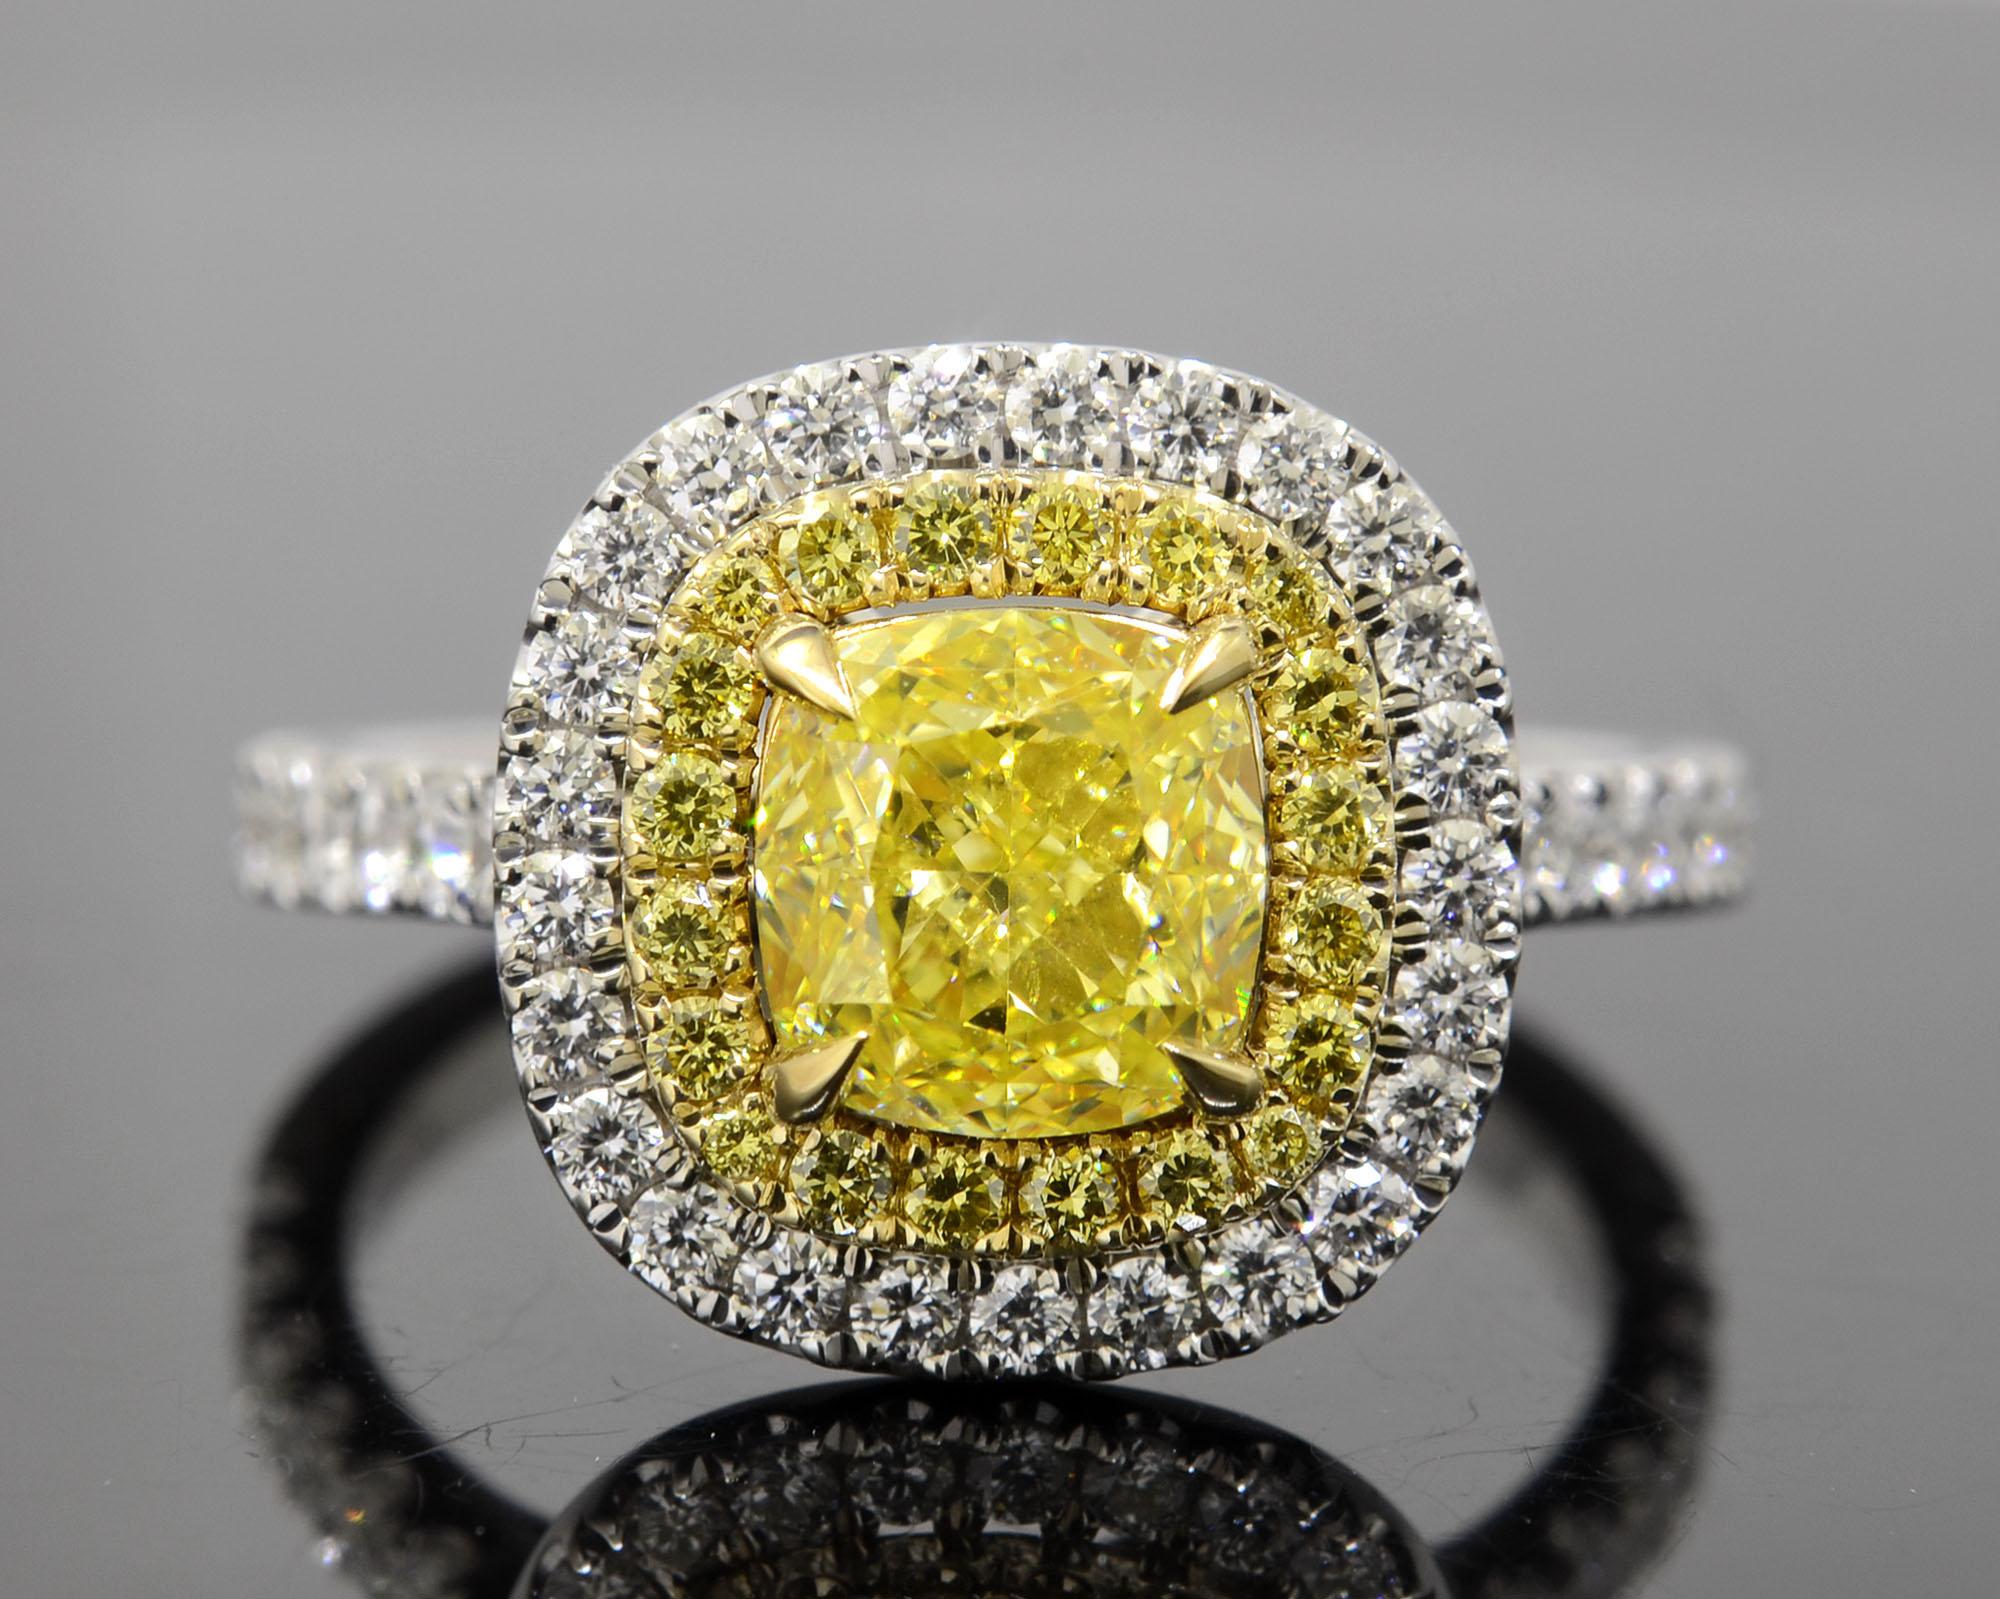 This lovely double halo Fancy Yellow Diamond Ring features a 1.50 Ct. natural fancy yellow cushion cut diamond with VS2 clarity. Surrounding the center gem and the shank are 1.00 Ct. of round cut fancy yellow and white diamonds in U-Pave setting.